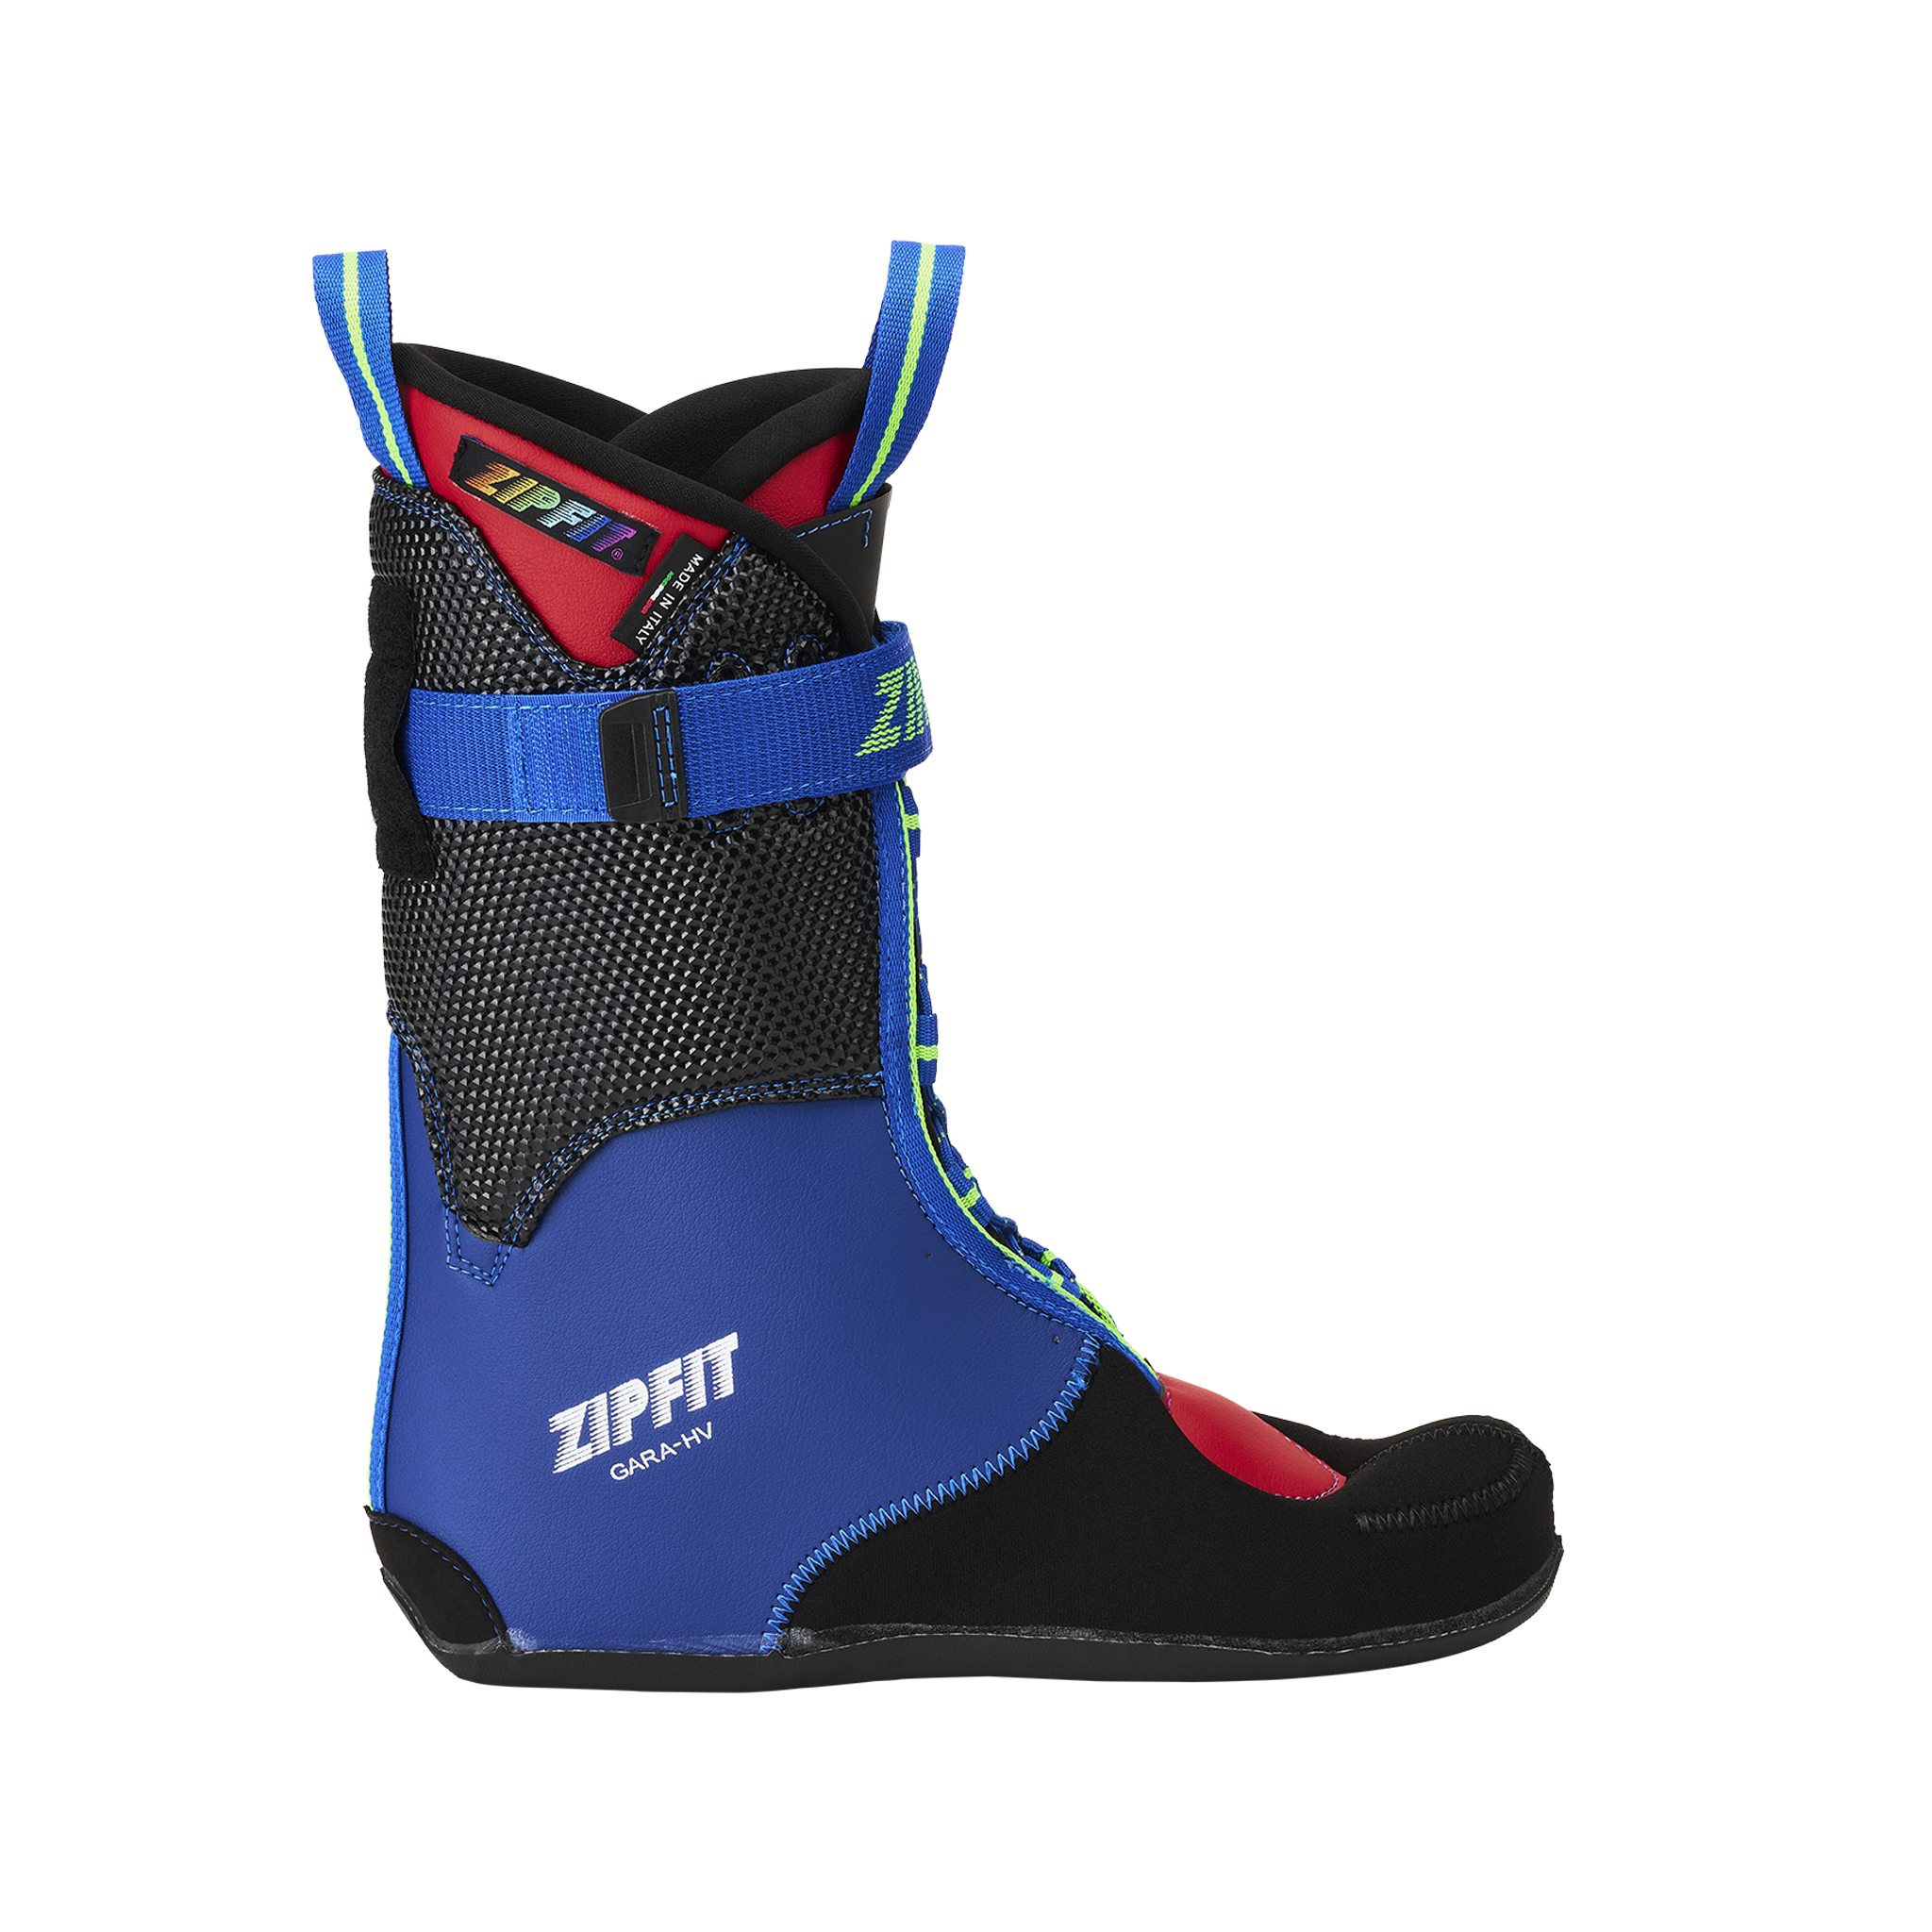 What's better than taking your ski boots off after a long day? Getting to  slip into the comfort that is the Dynafit Winter Bootie!!! Size